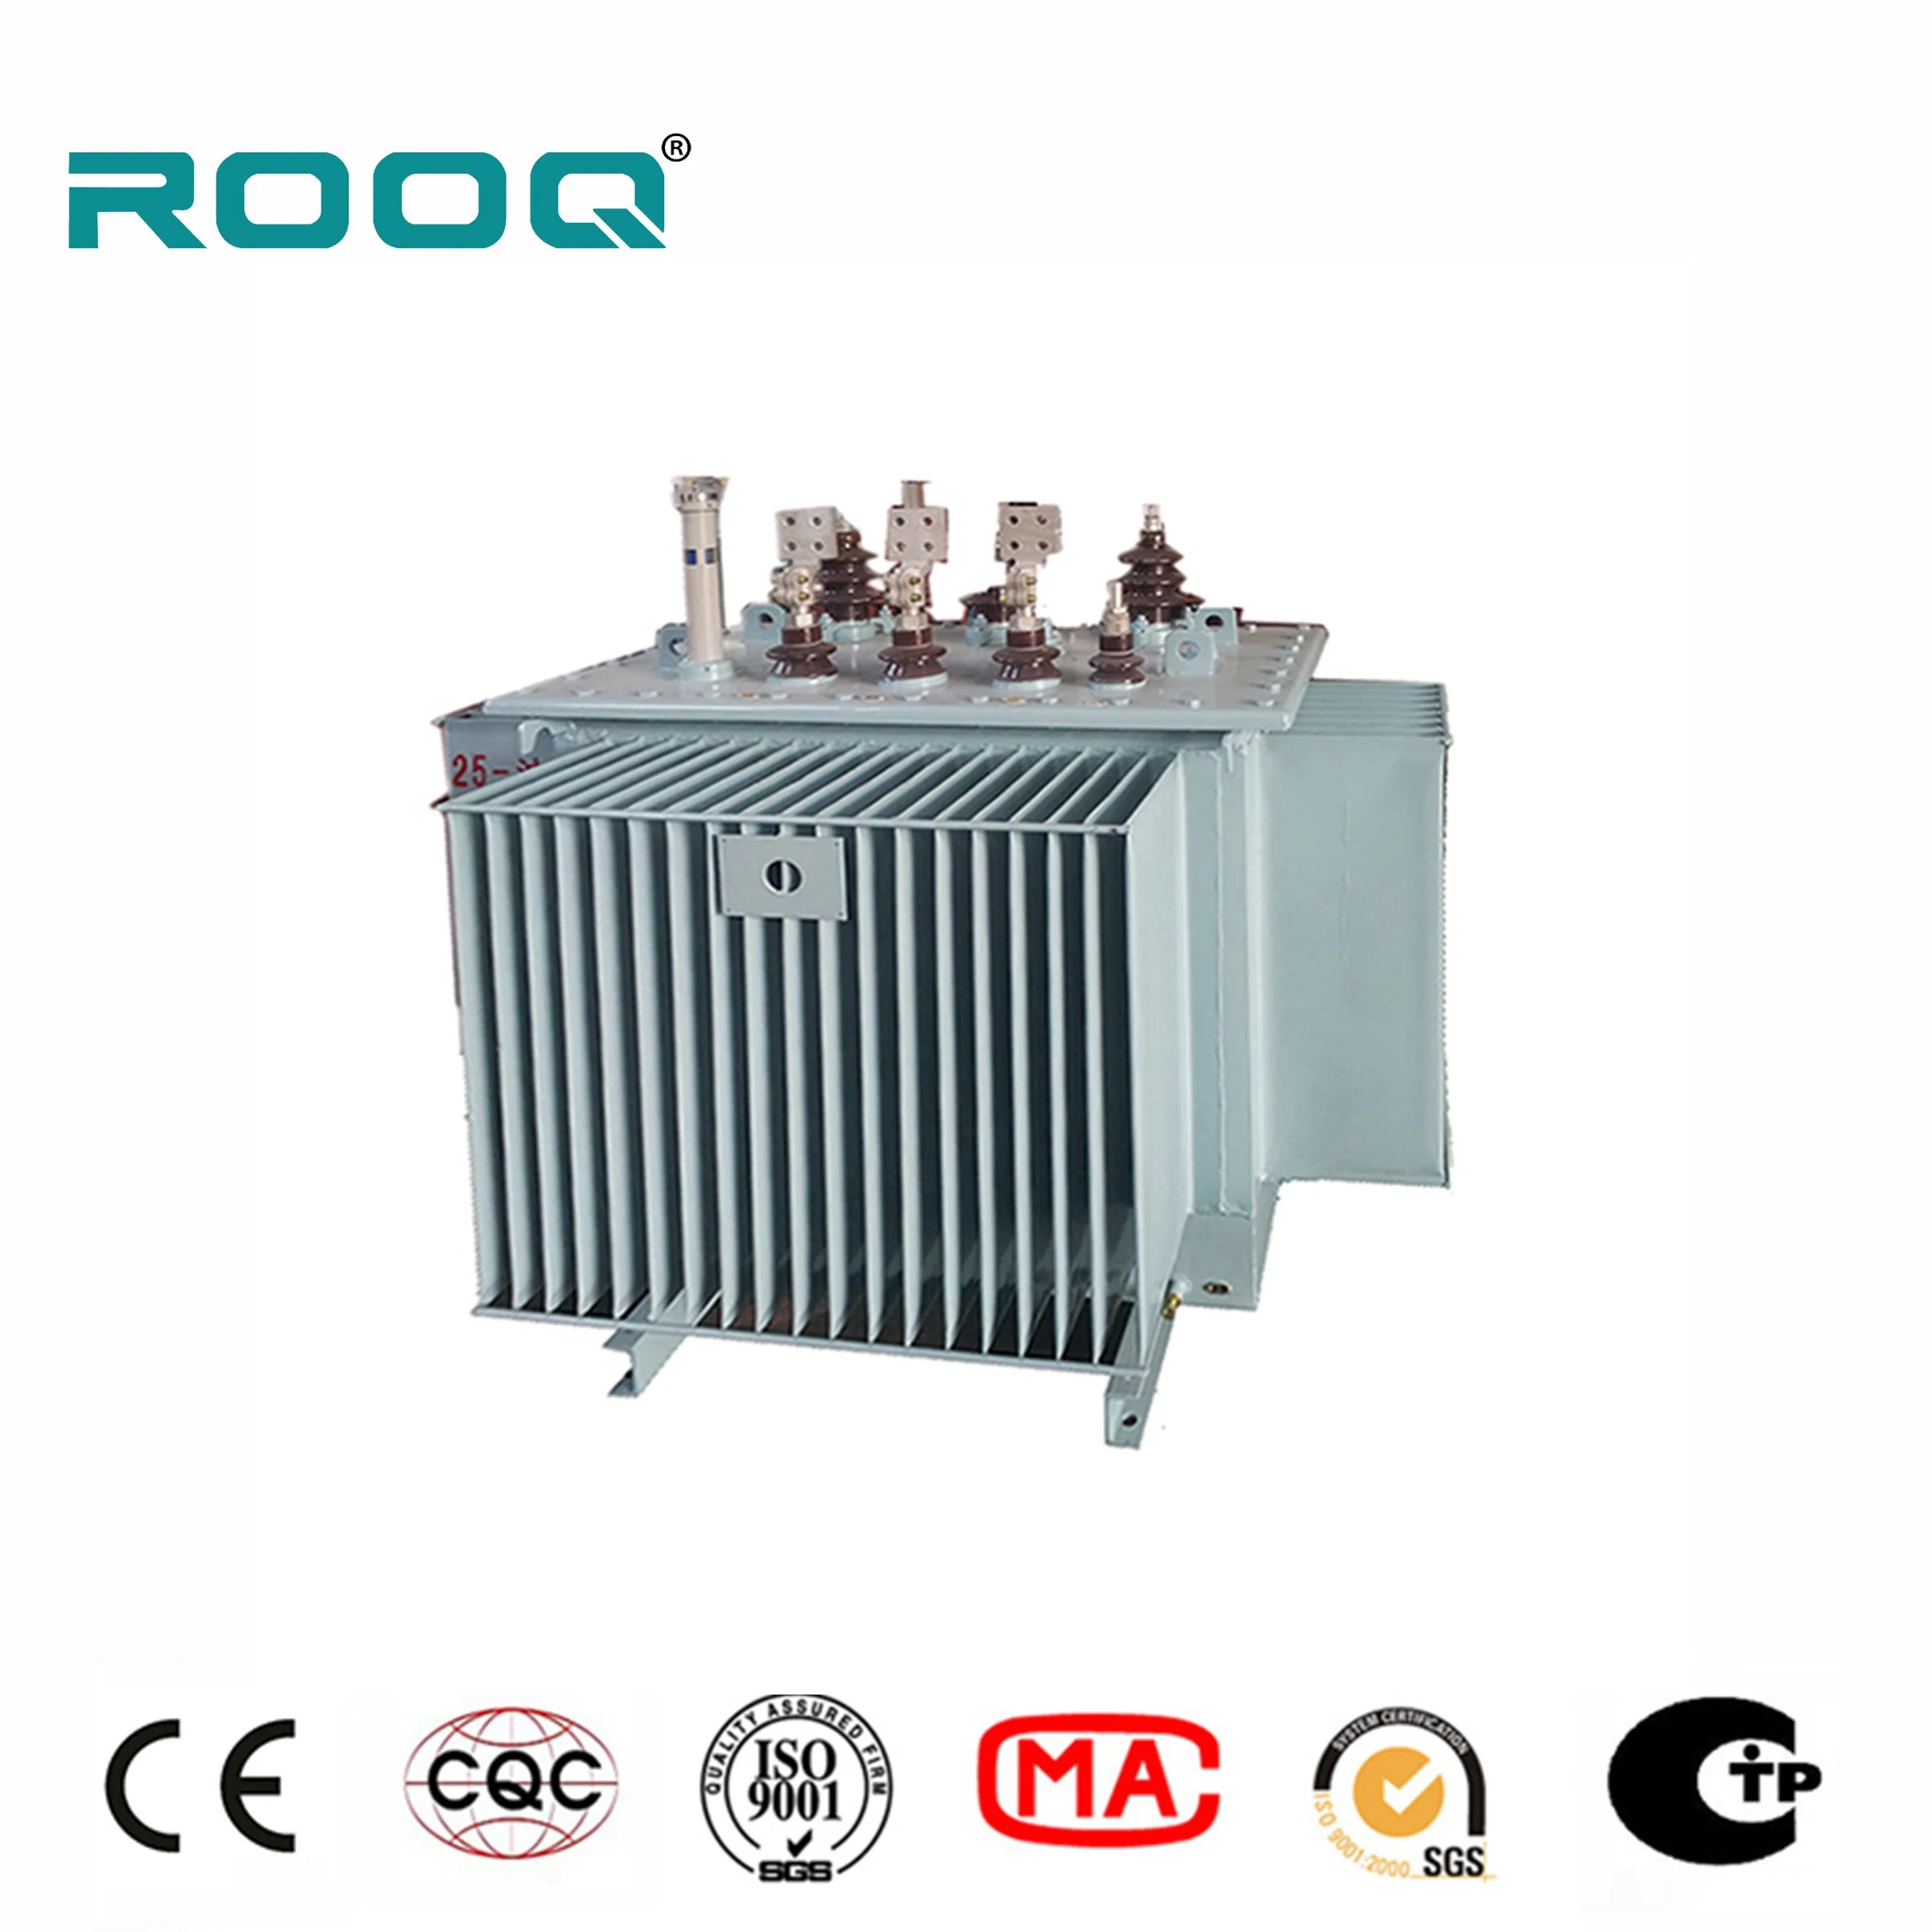 S9 / S11m10kv High Voltage Oil Immersed Power Transformer Can Be Customized for 380V Three-Phase